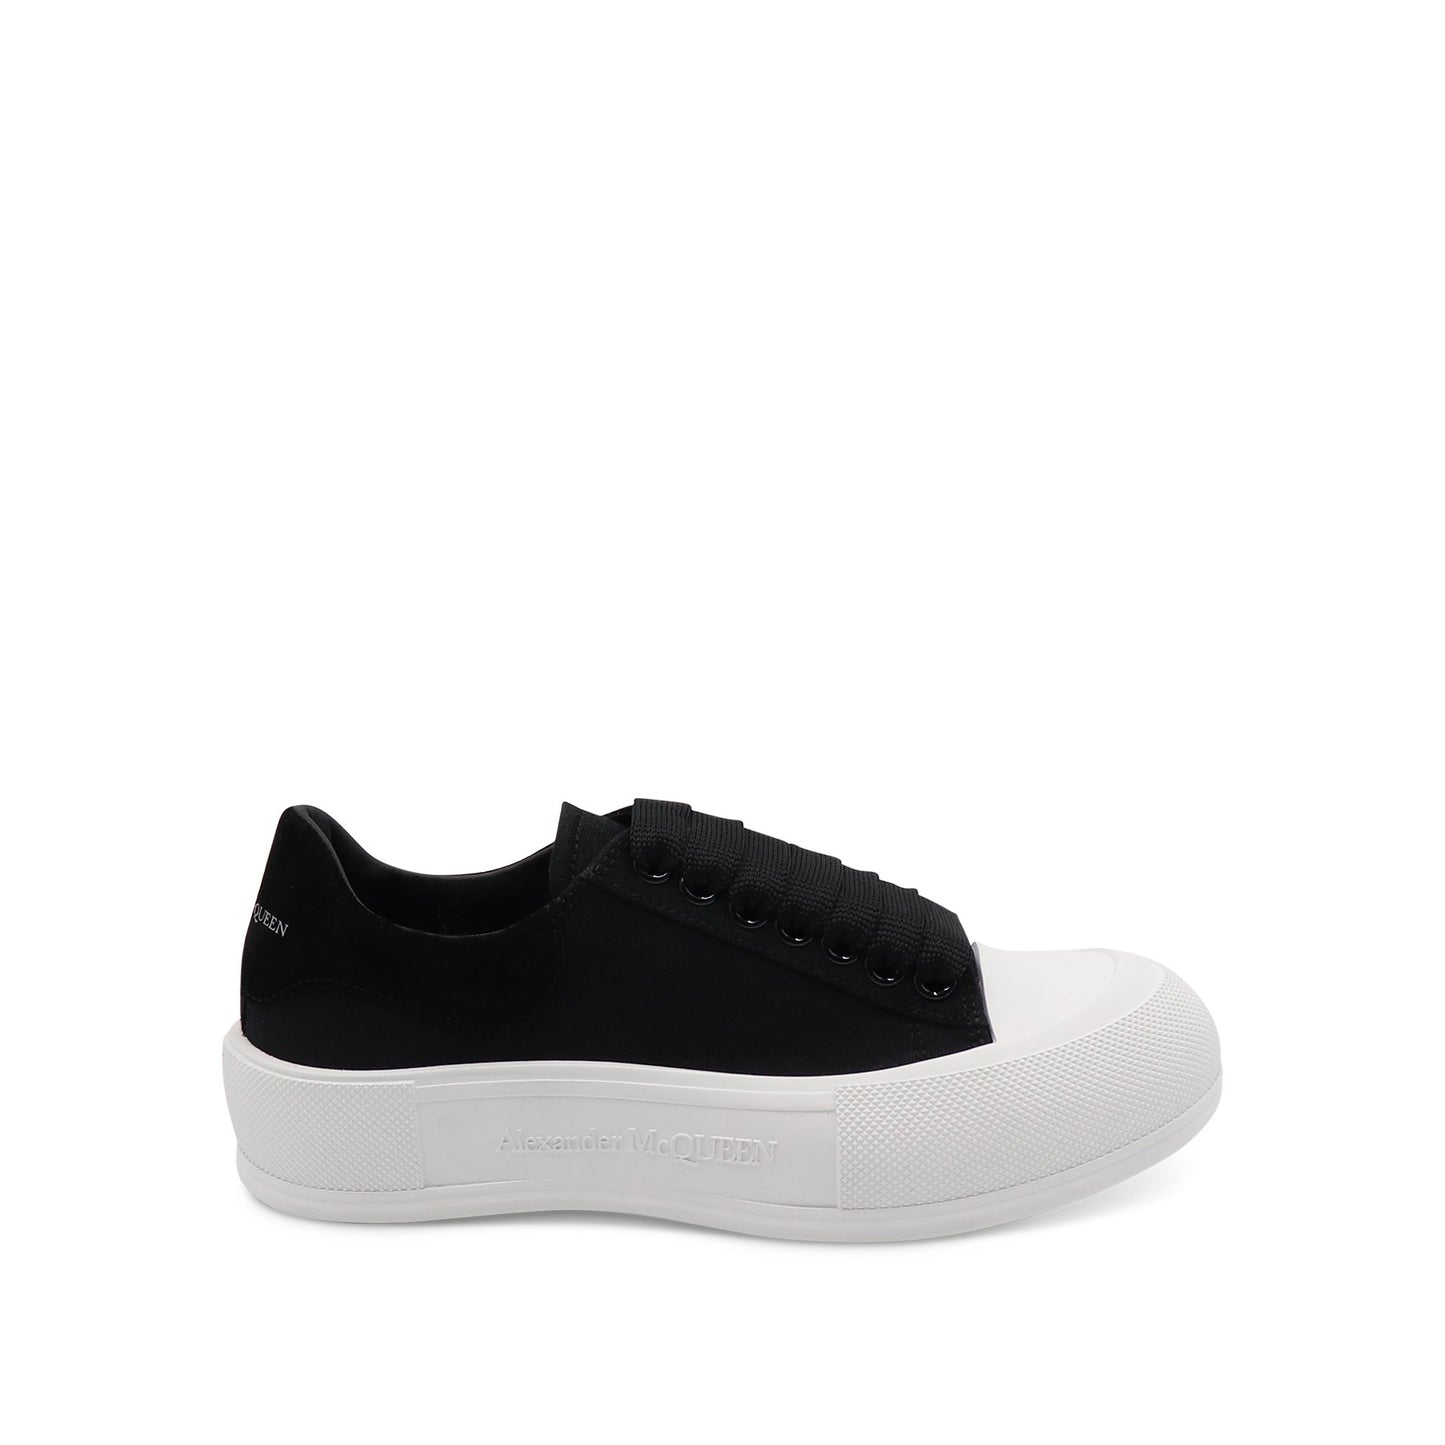 Lace Up Plimsoll Canvas Sneaker in Black